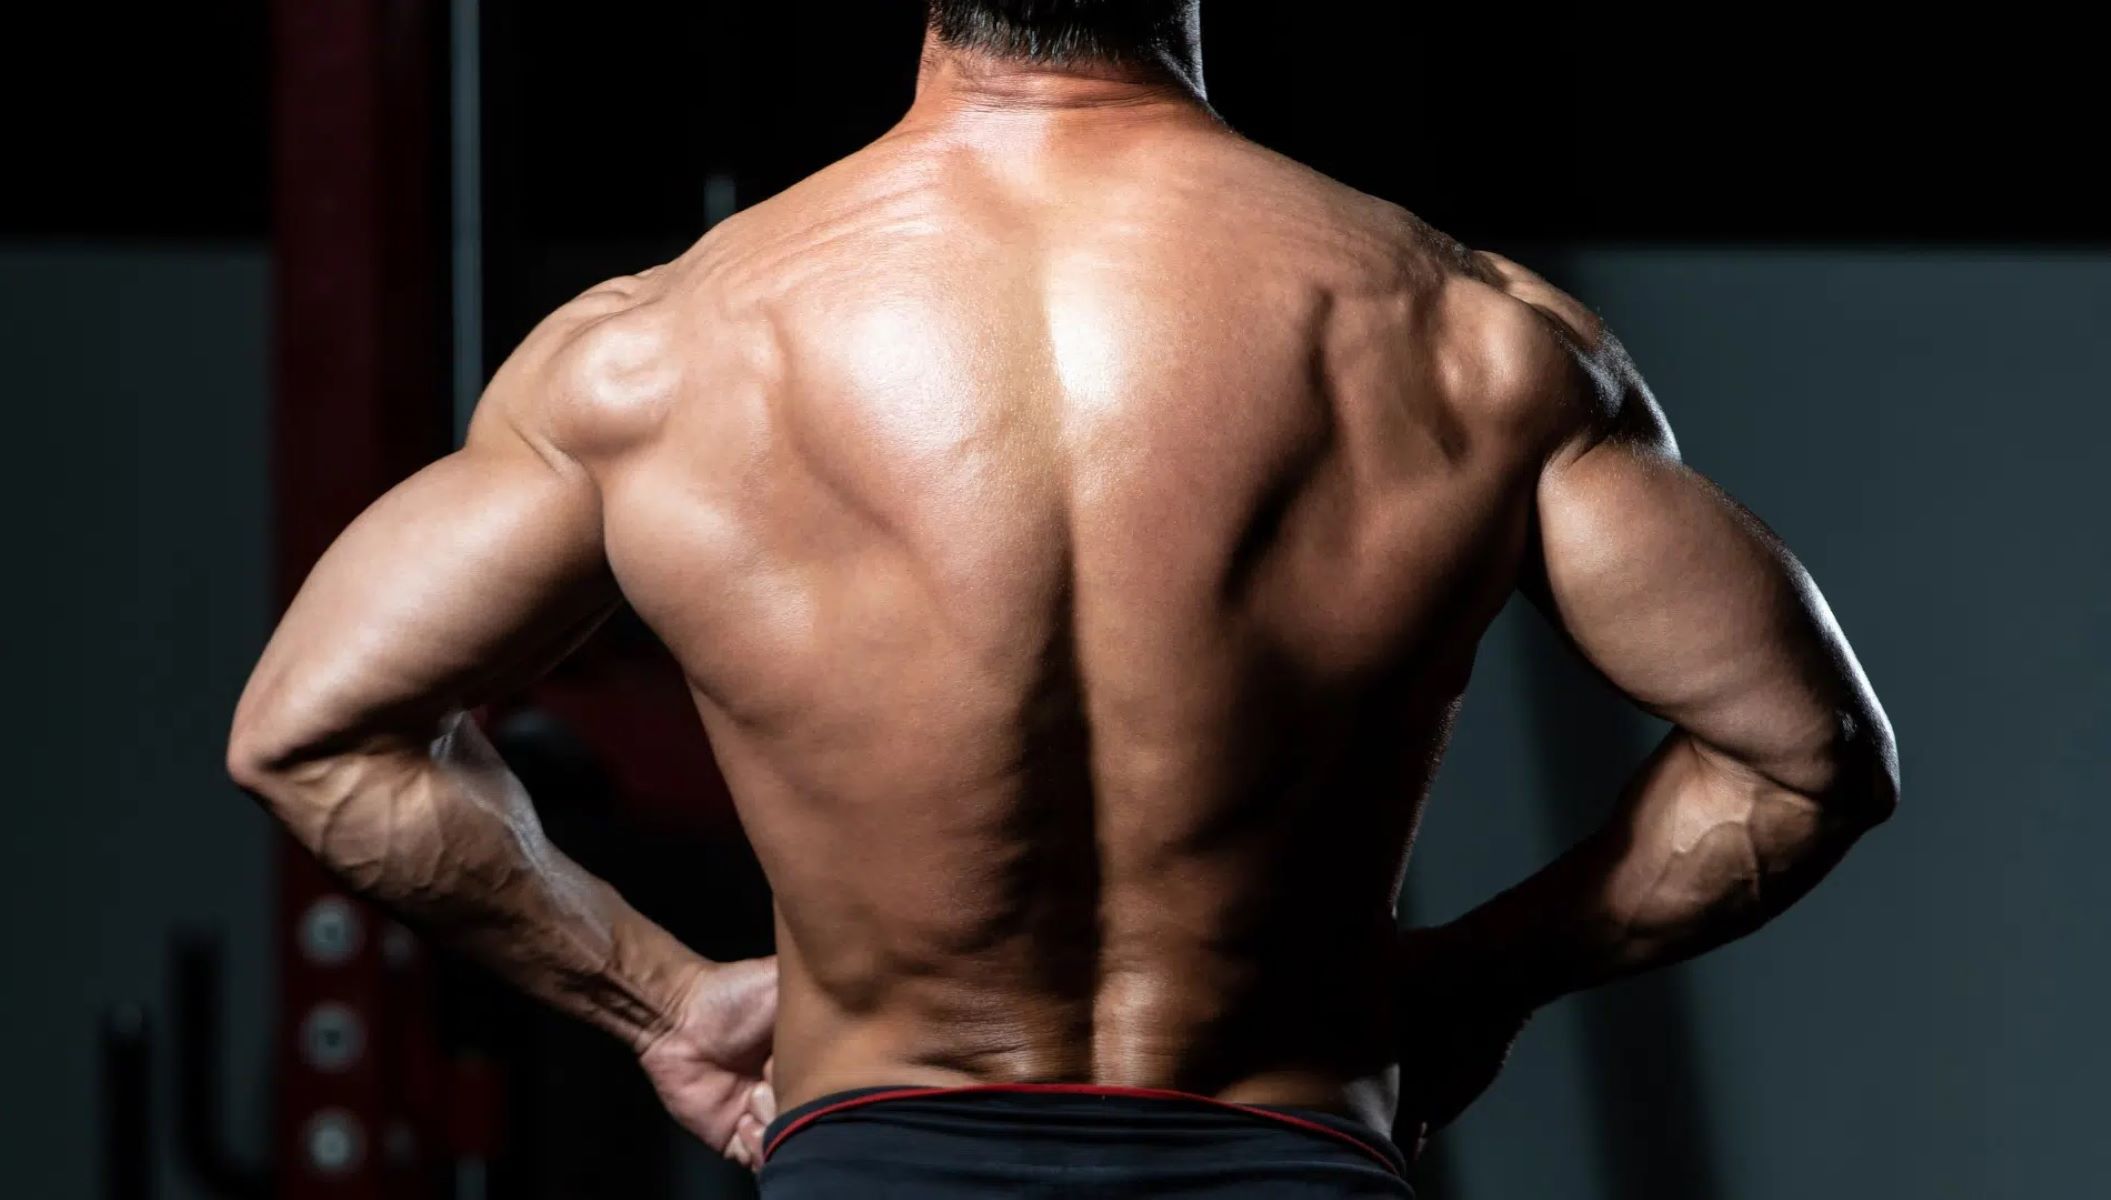 How To Perfect Your Lat Spread